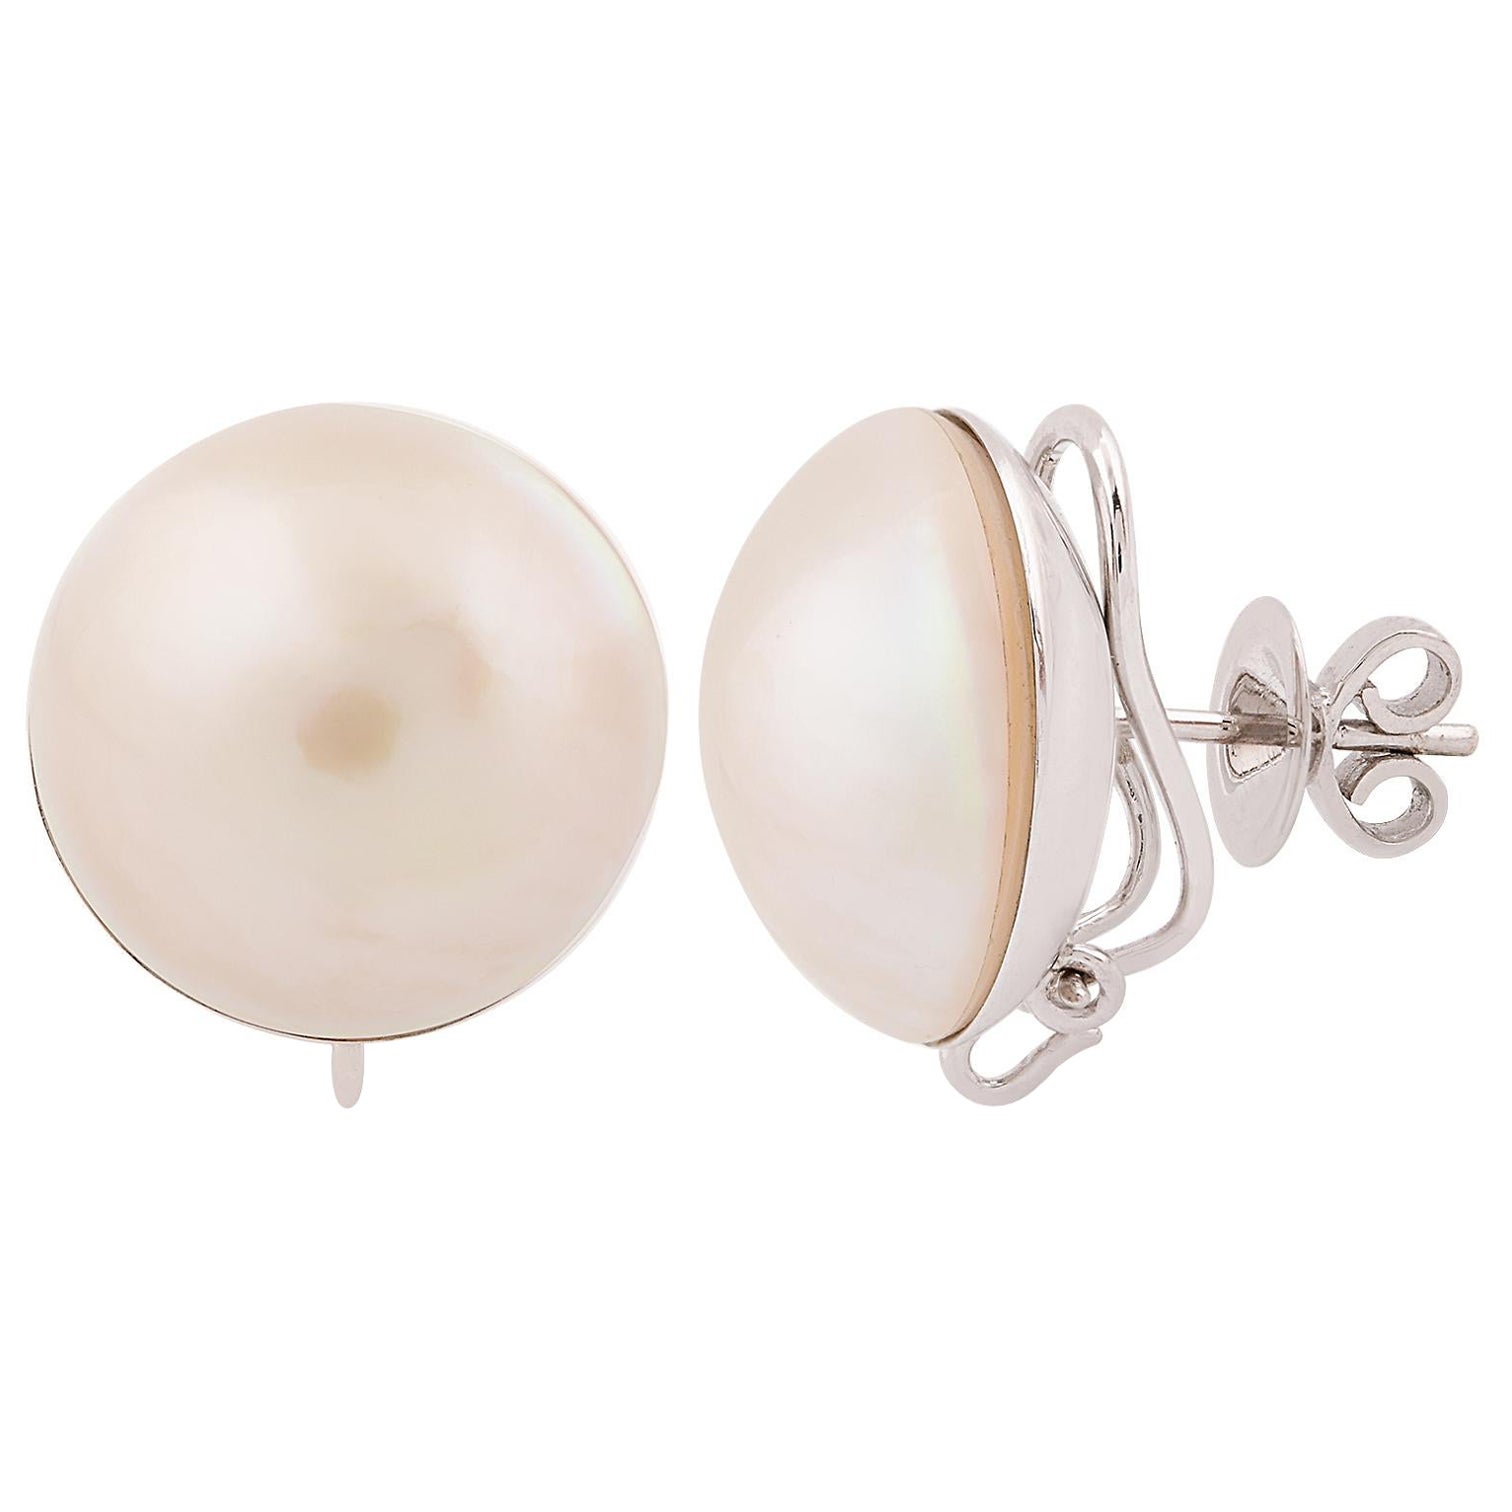 Item Code:- SEE-11746
Gross Weight :- 10.20 gm Approx.
Solid 18k White Gold Weight :- 5.51 gm Approx.
Natural Pearl Weight :- 23.46 ct. Approx.
Earrings Size : 17 mm Approx.

✦ Sizing
.....................
We can adjust most items to fit your sizing